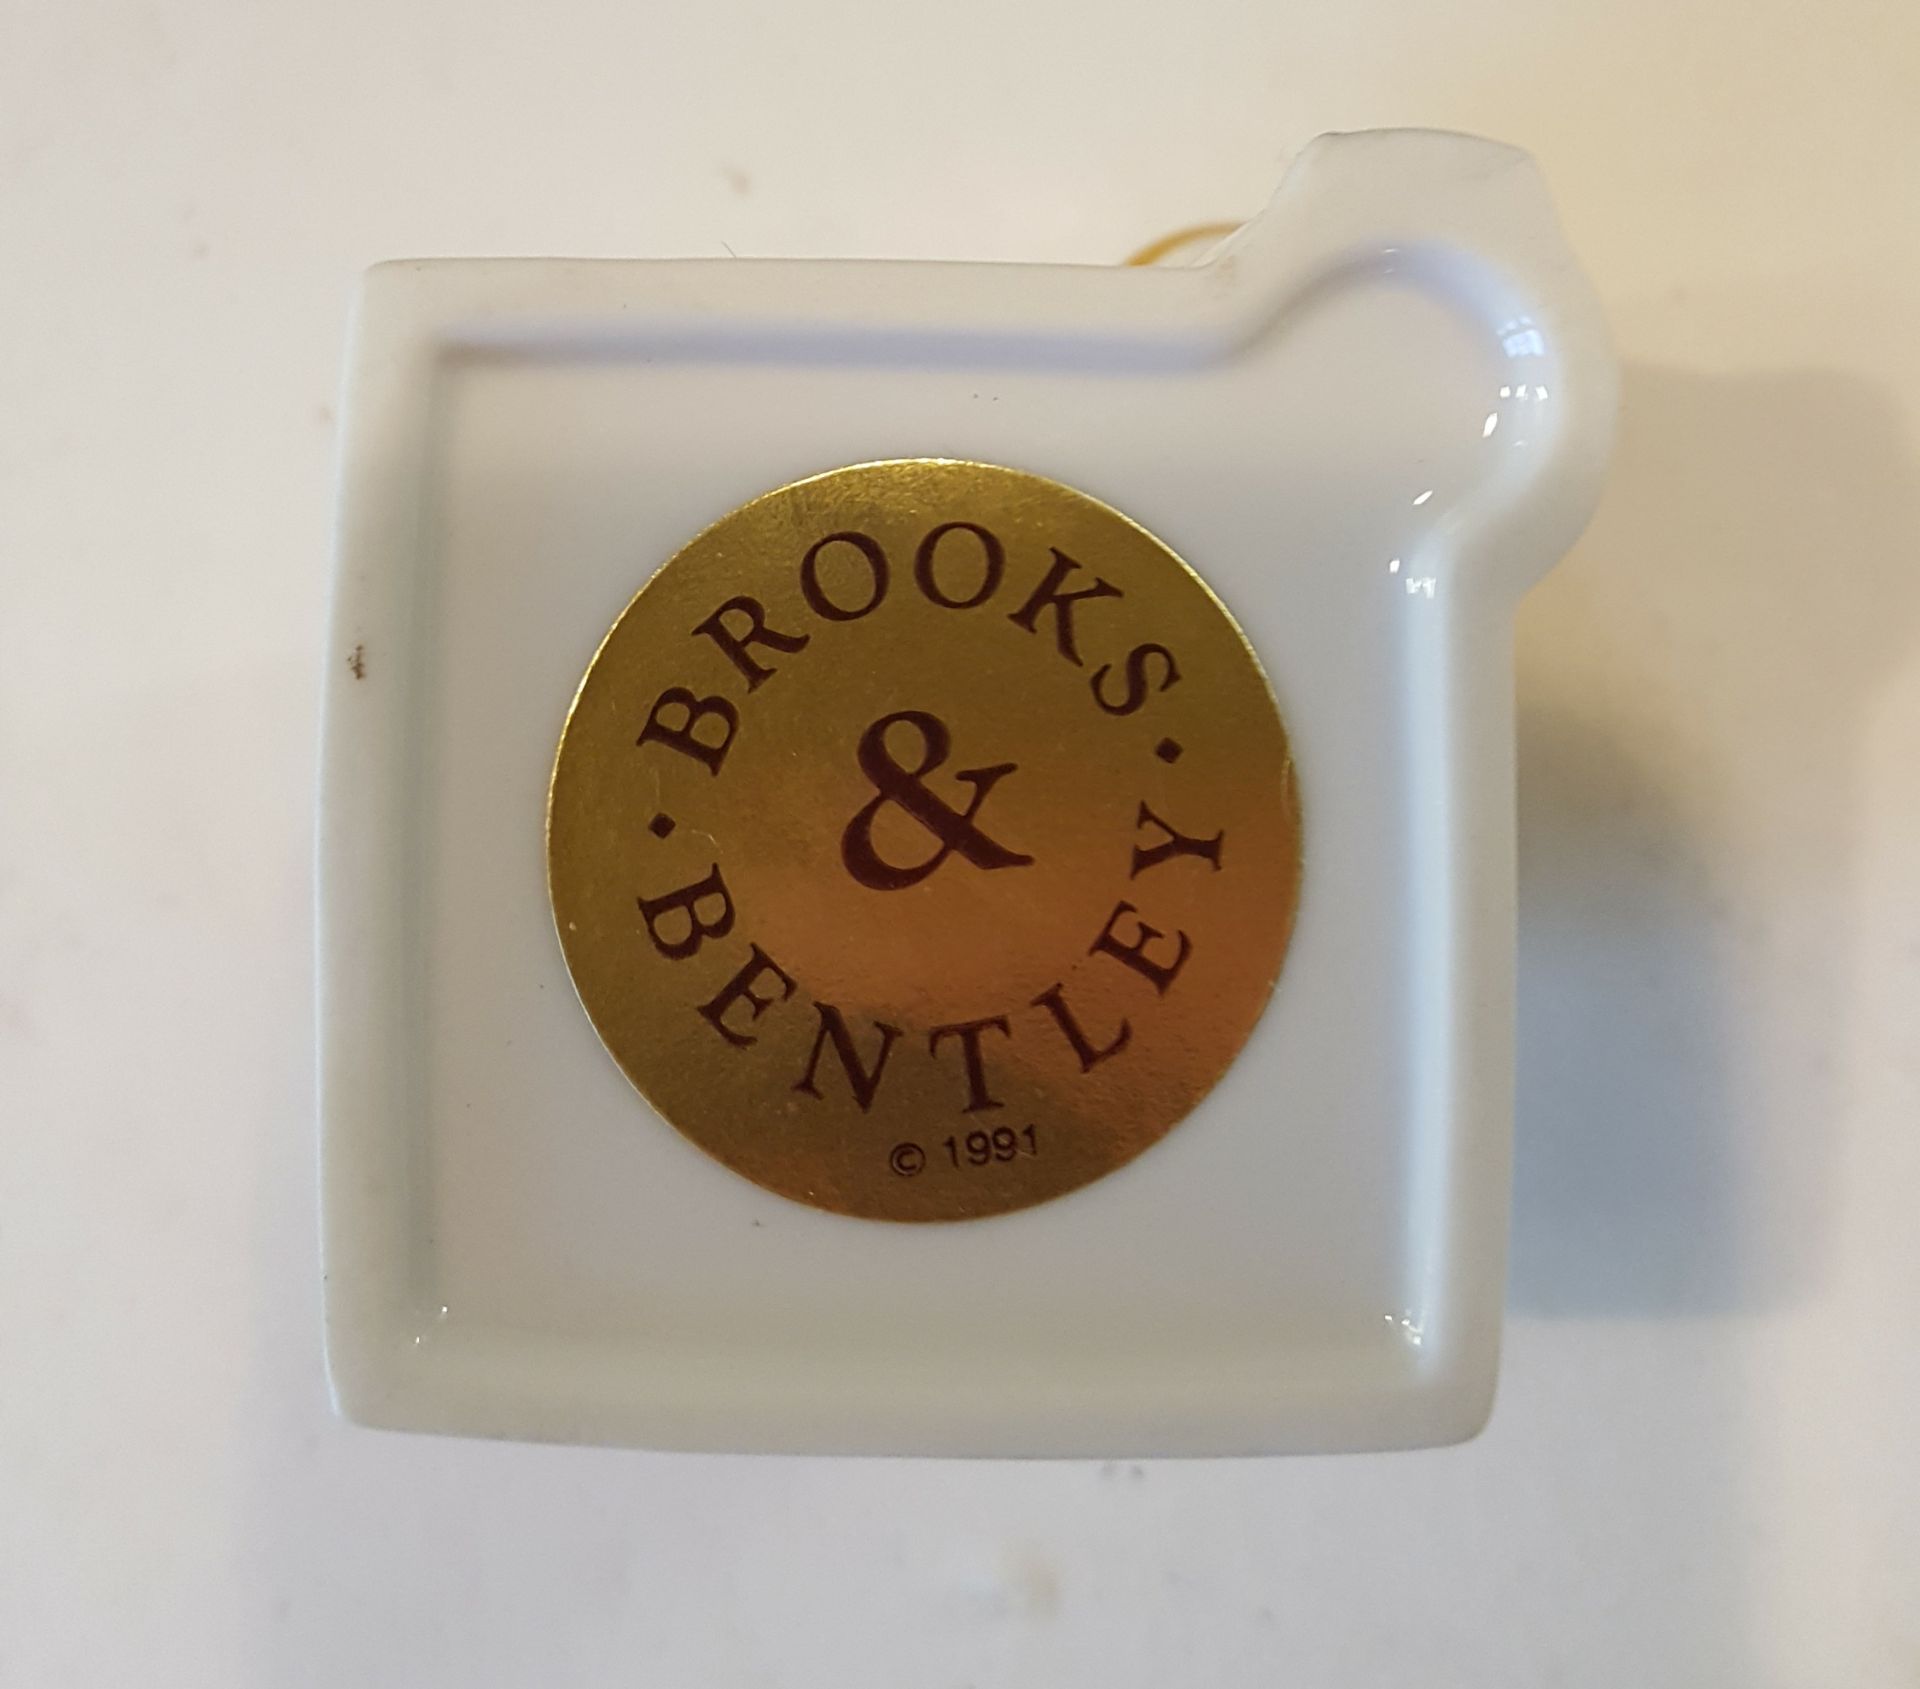 Vintage Retro Novelty Spice Rack & Containers by Brooks & Bentley NO RESERVE - Image 2 of 2